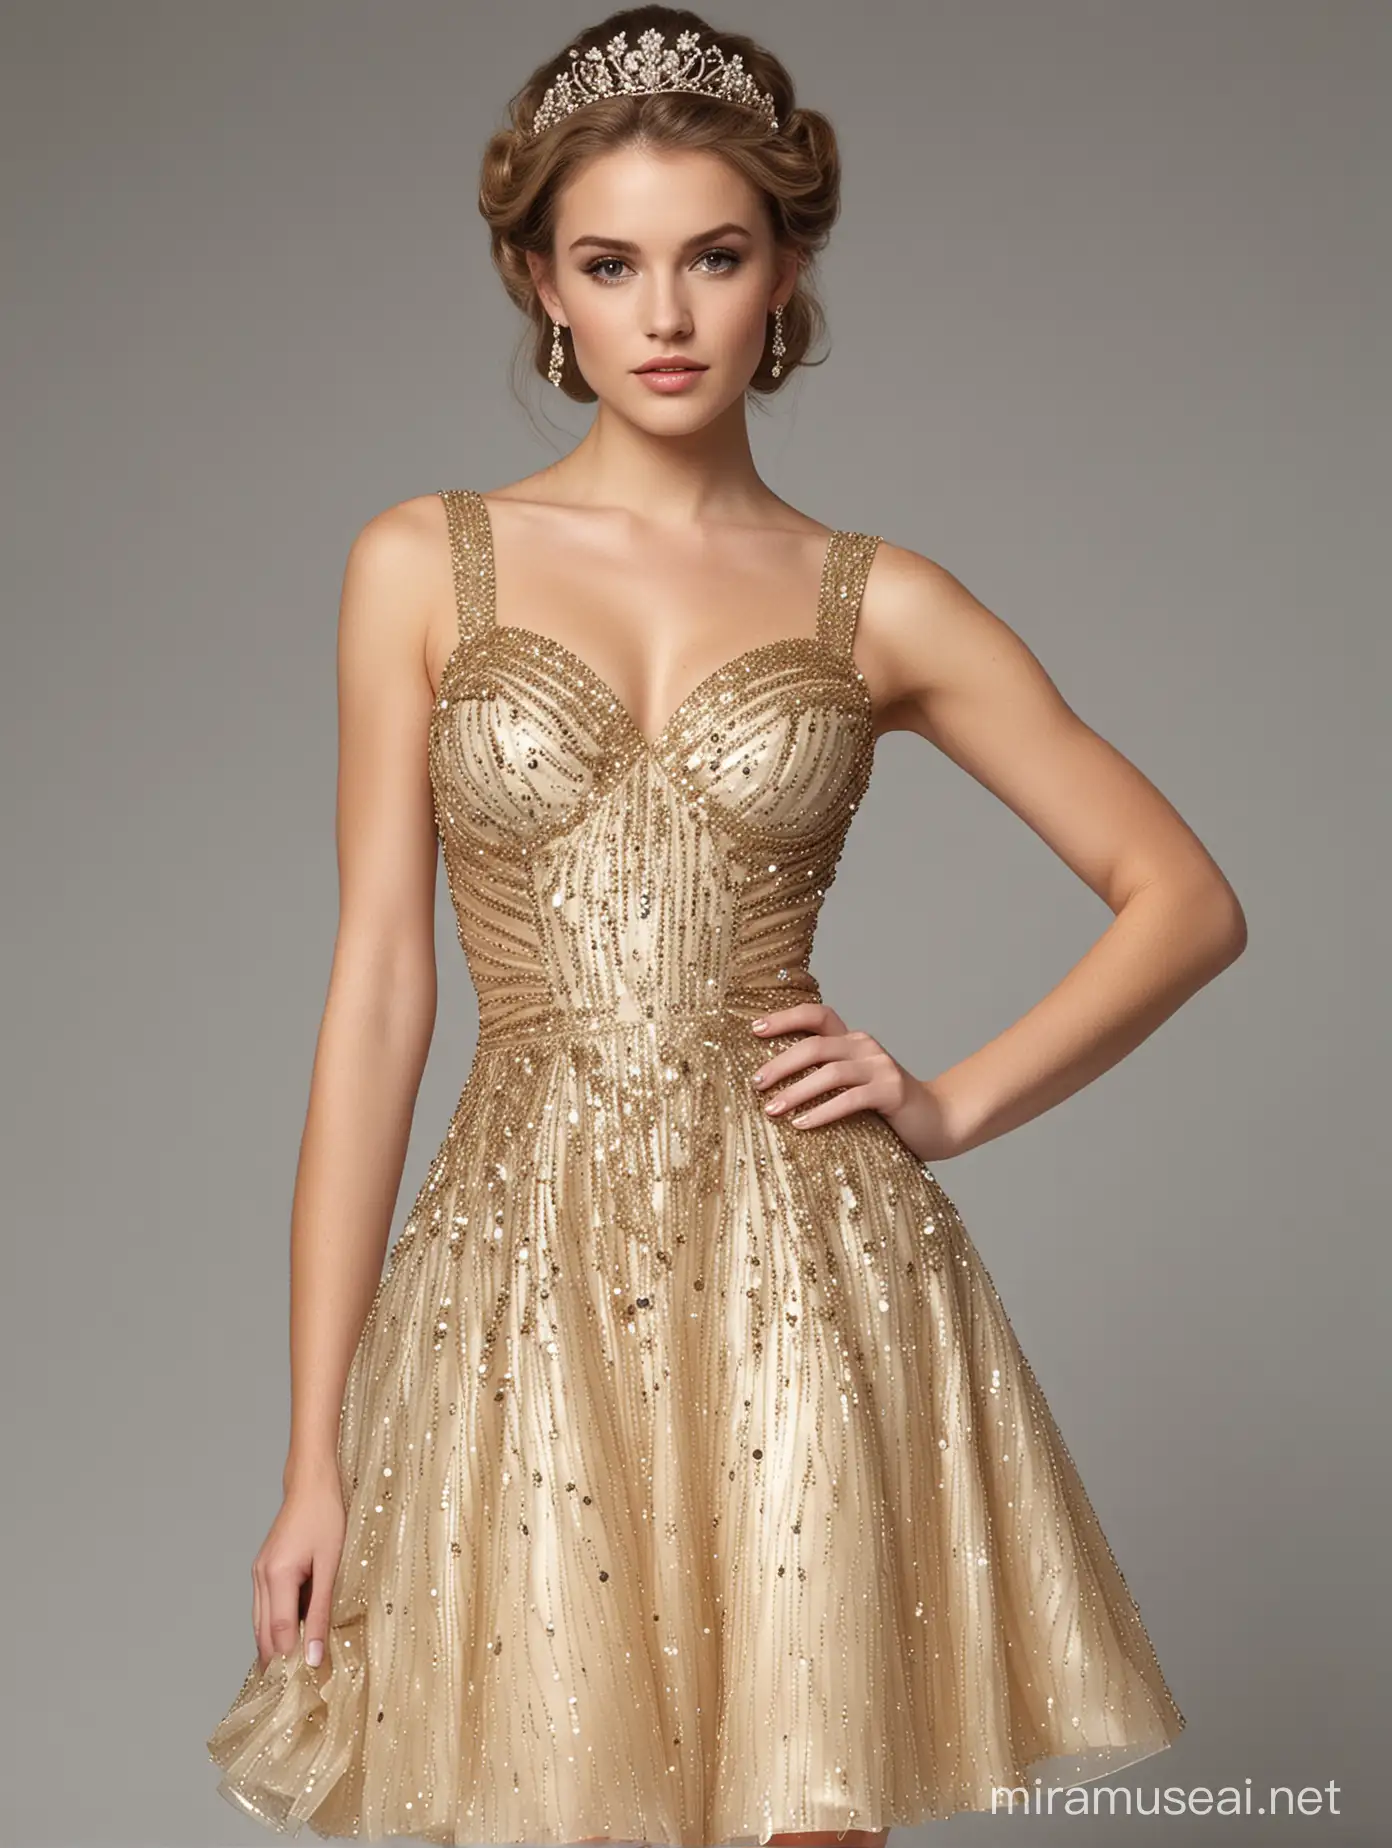 I want same dress with an expensive hair style.

Should be a white lady. The dress should have beautiful crystals because it's a party dress. It must be short or mini and fitting. Must be gold and expensive. Should fit the model